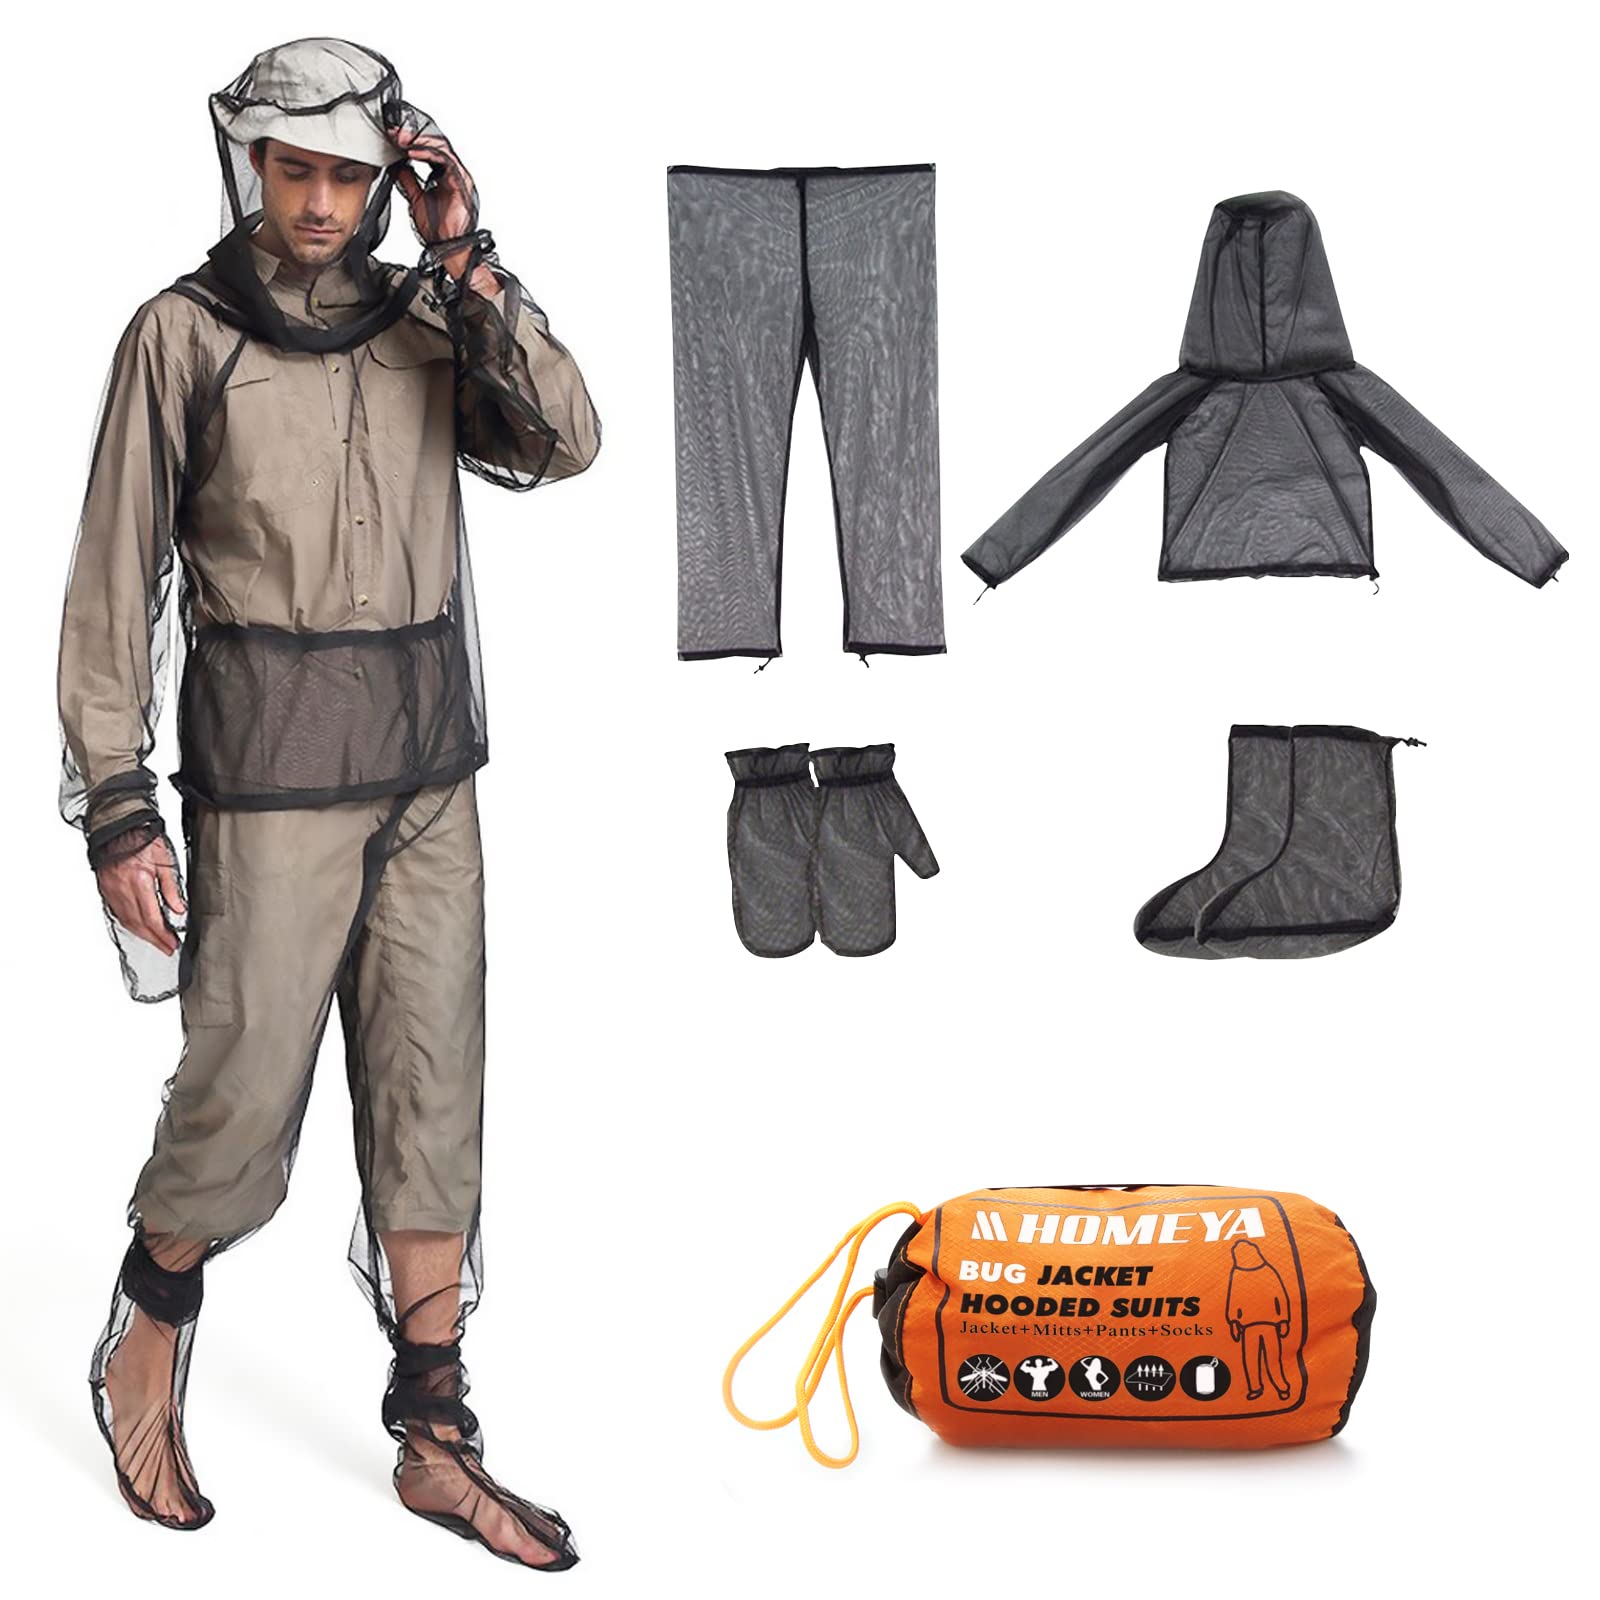 The Wearable Mosquito Net (Pants)